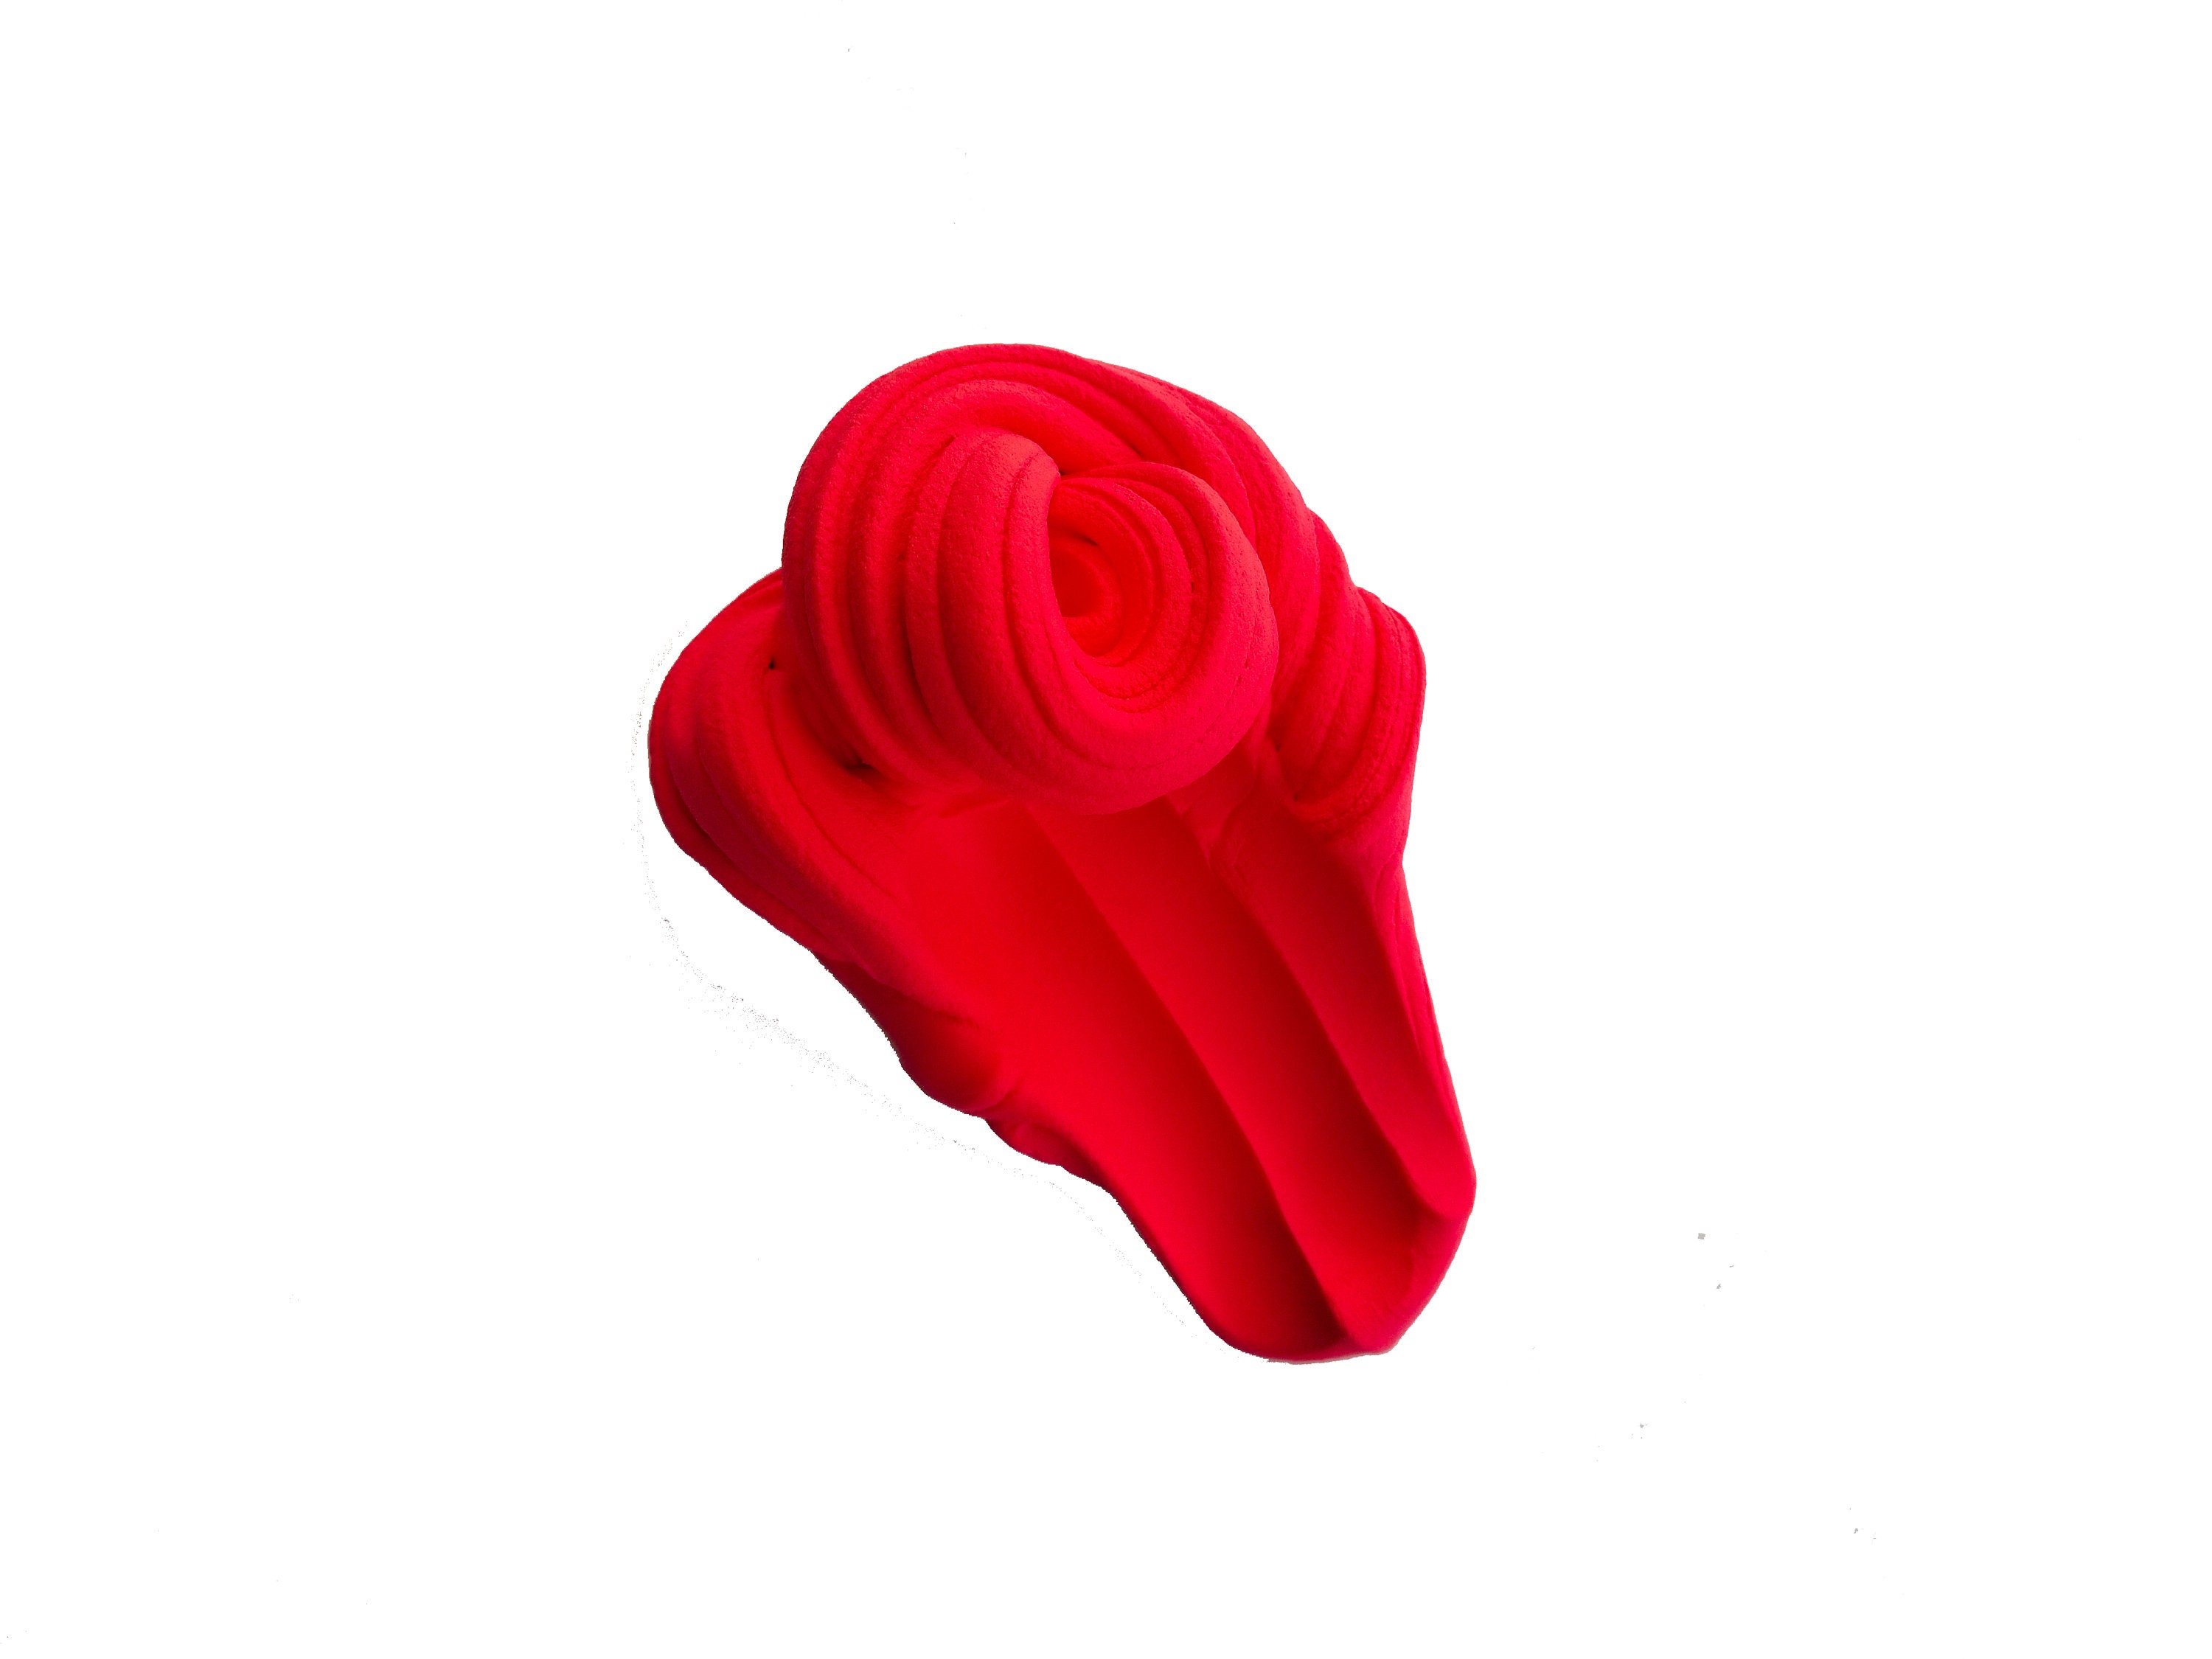 Air Dry Foam Clay (Red) : : Toys & Games